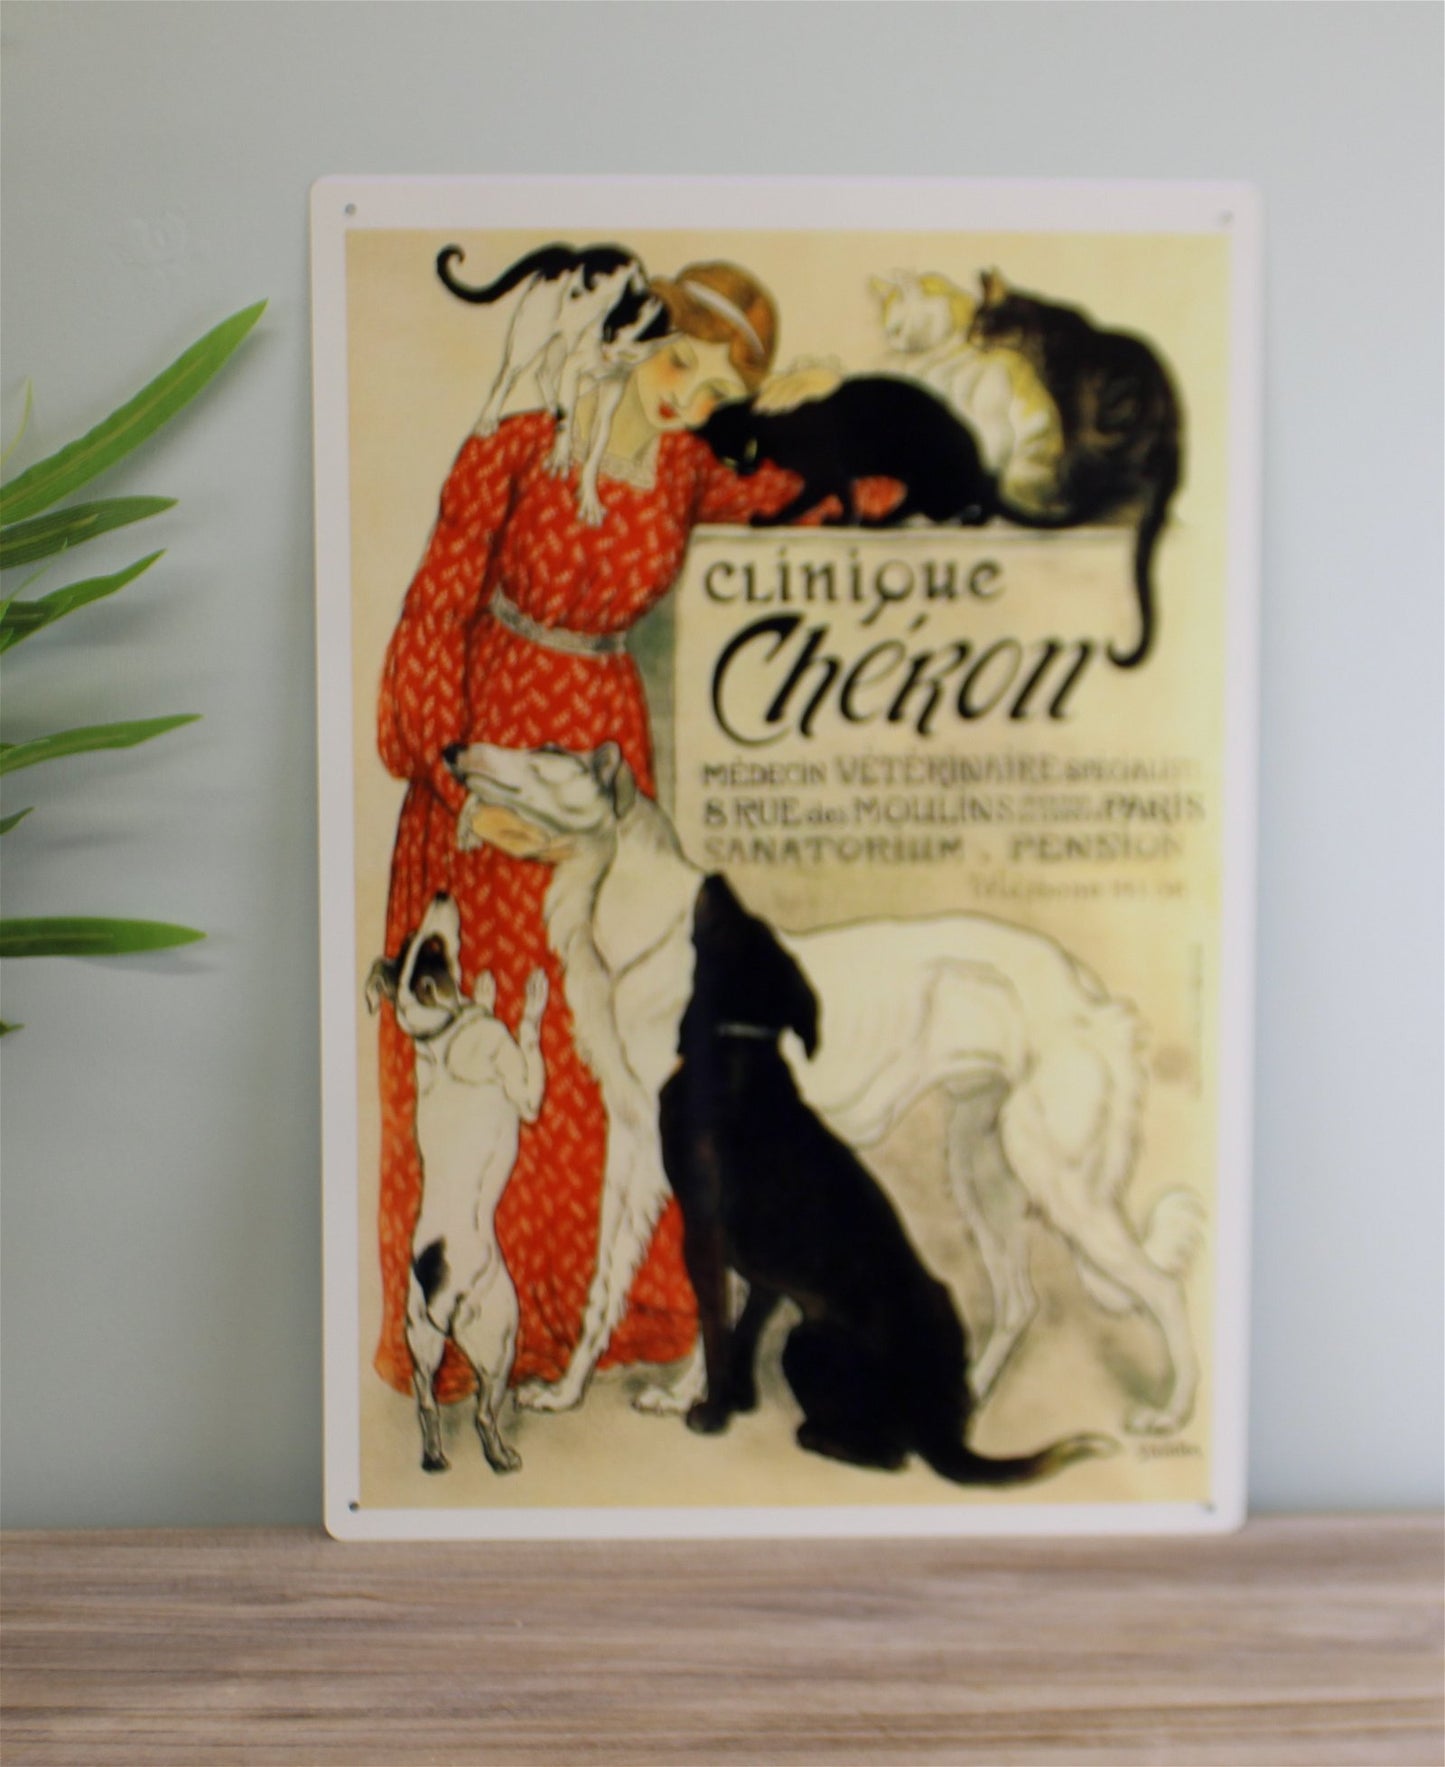 Vintage Metal Sign - Retro Advertising - Clinique Cheron Willow and Wine